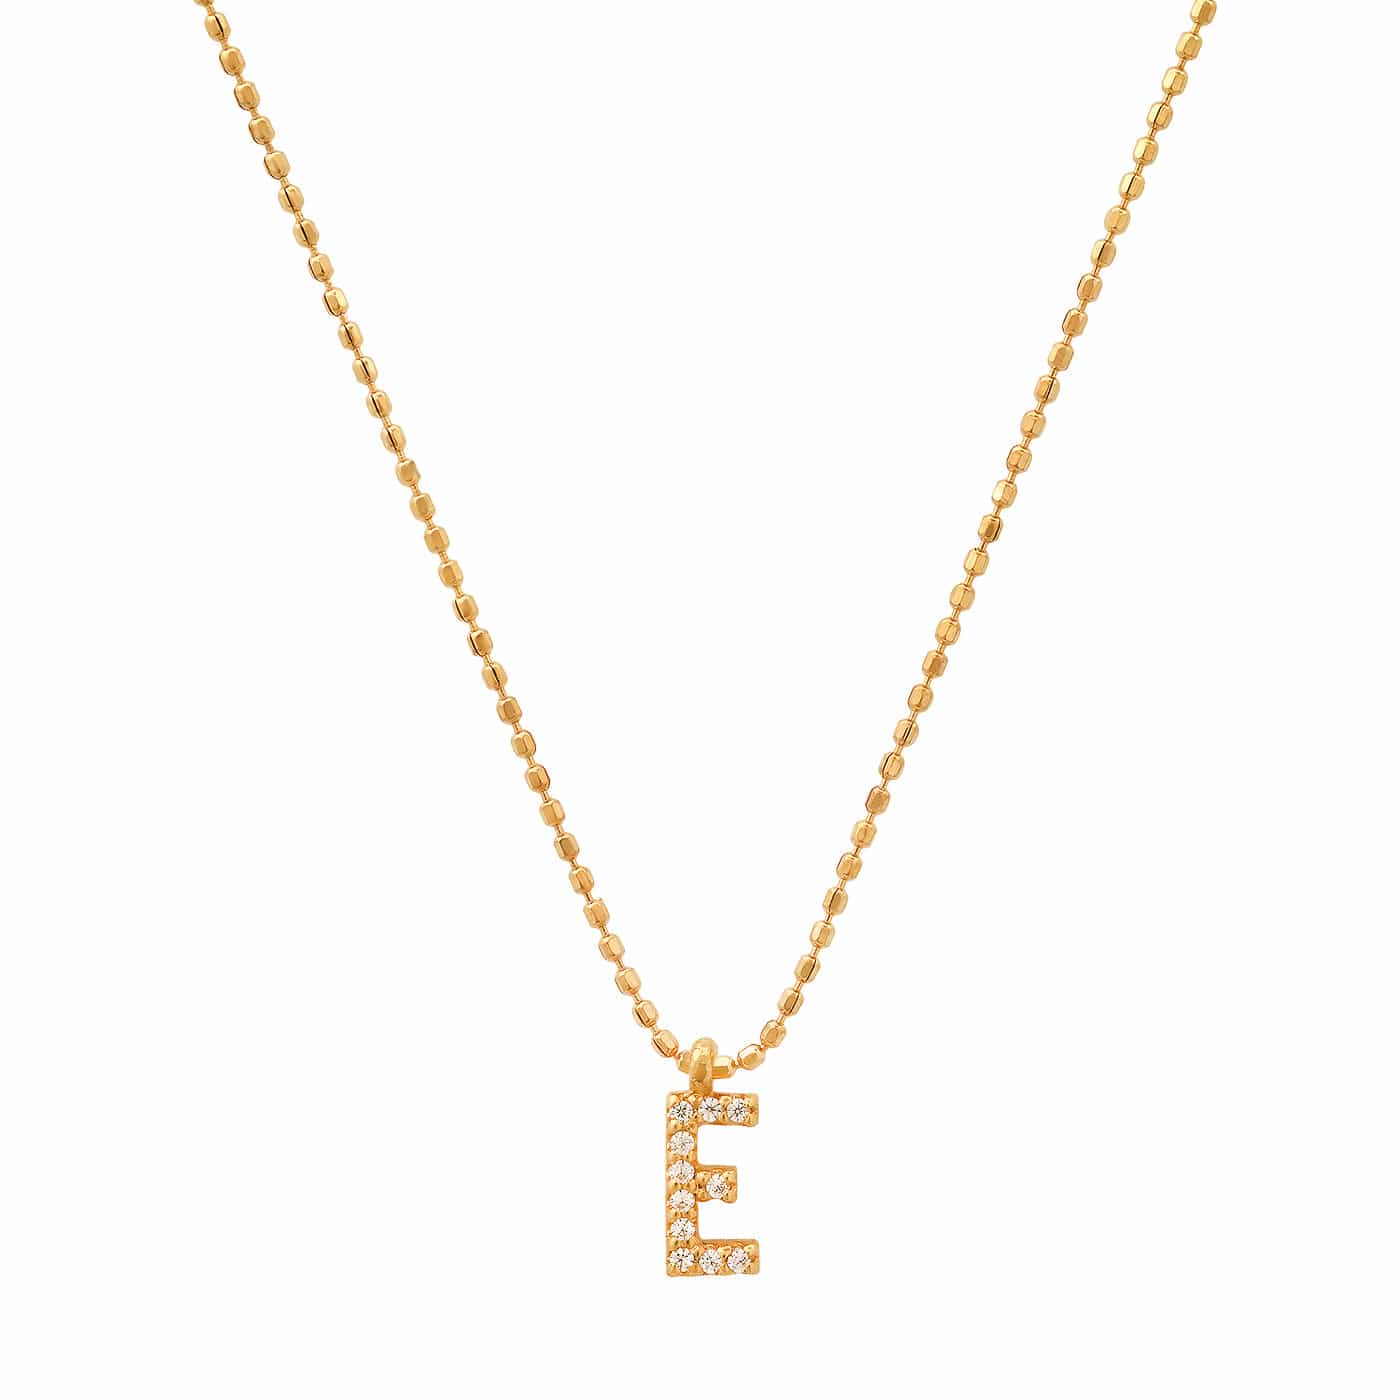 TAI JEWELRY Necklace E Pave Initial Ball Chain Necklace